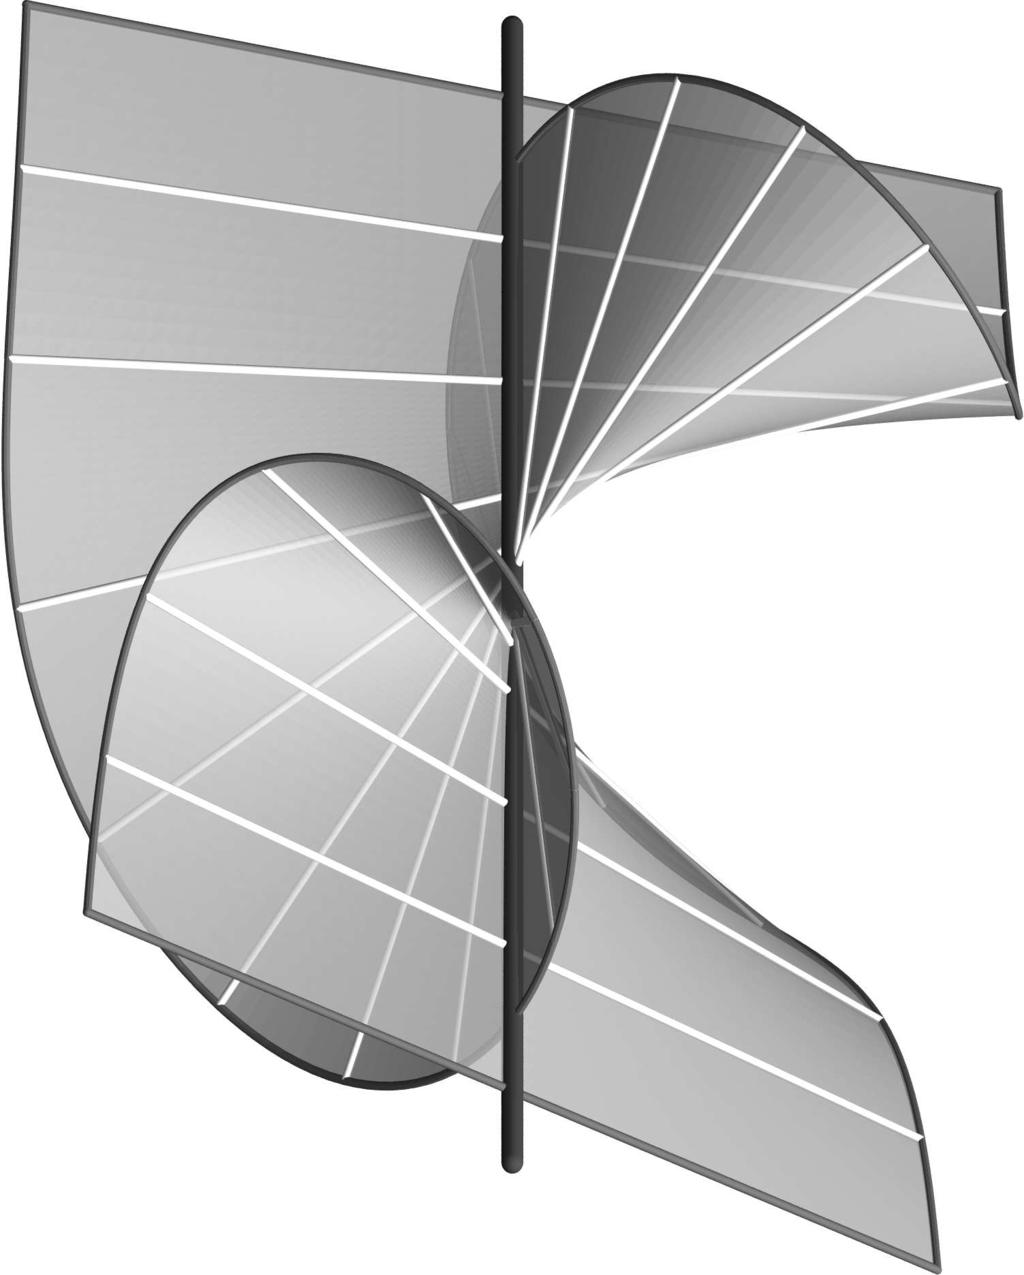 Cayley s surface revisited 3 form R Φ α,3,γ 1,u 1 ) T ) ) comprise the affine part of a parabola, c α,3,γ say, lying on F.